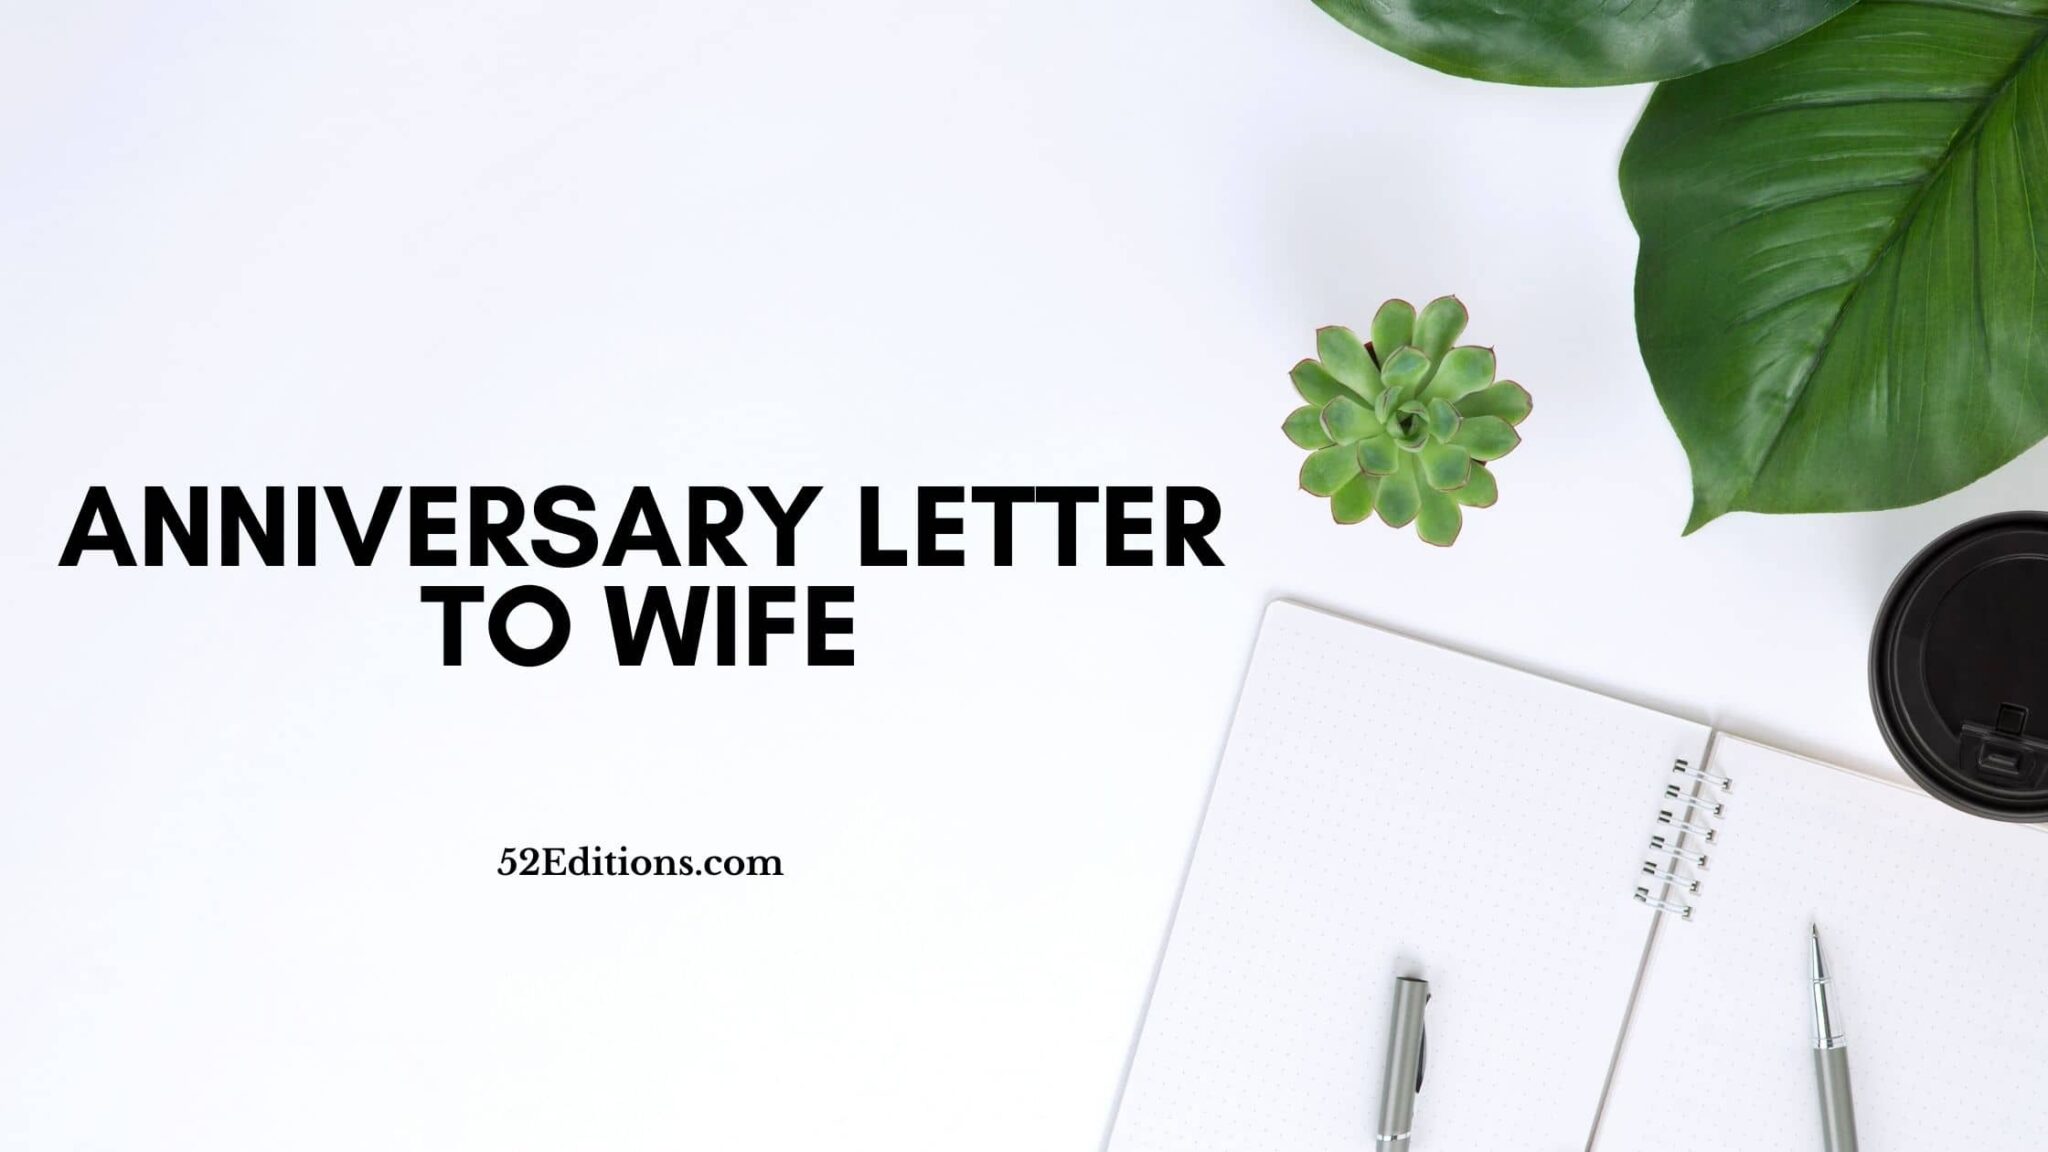 Anniversary Letter To Wife (Sample) // Get FREE Letter Templates (Print ... picture photo